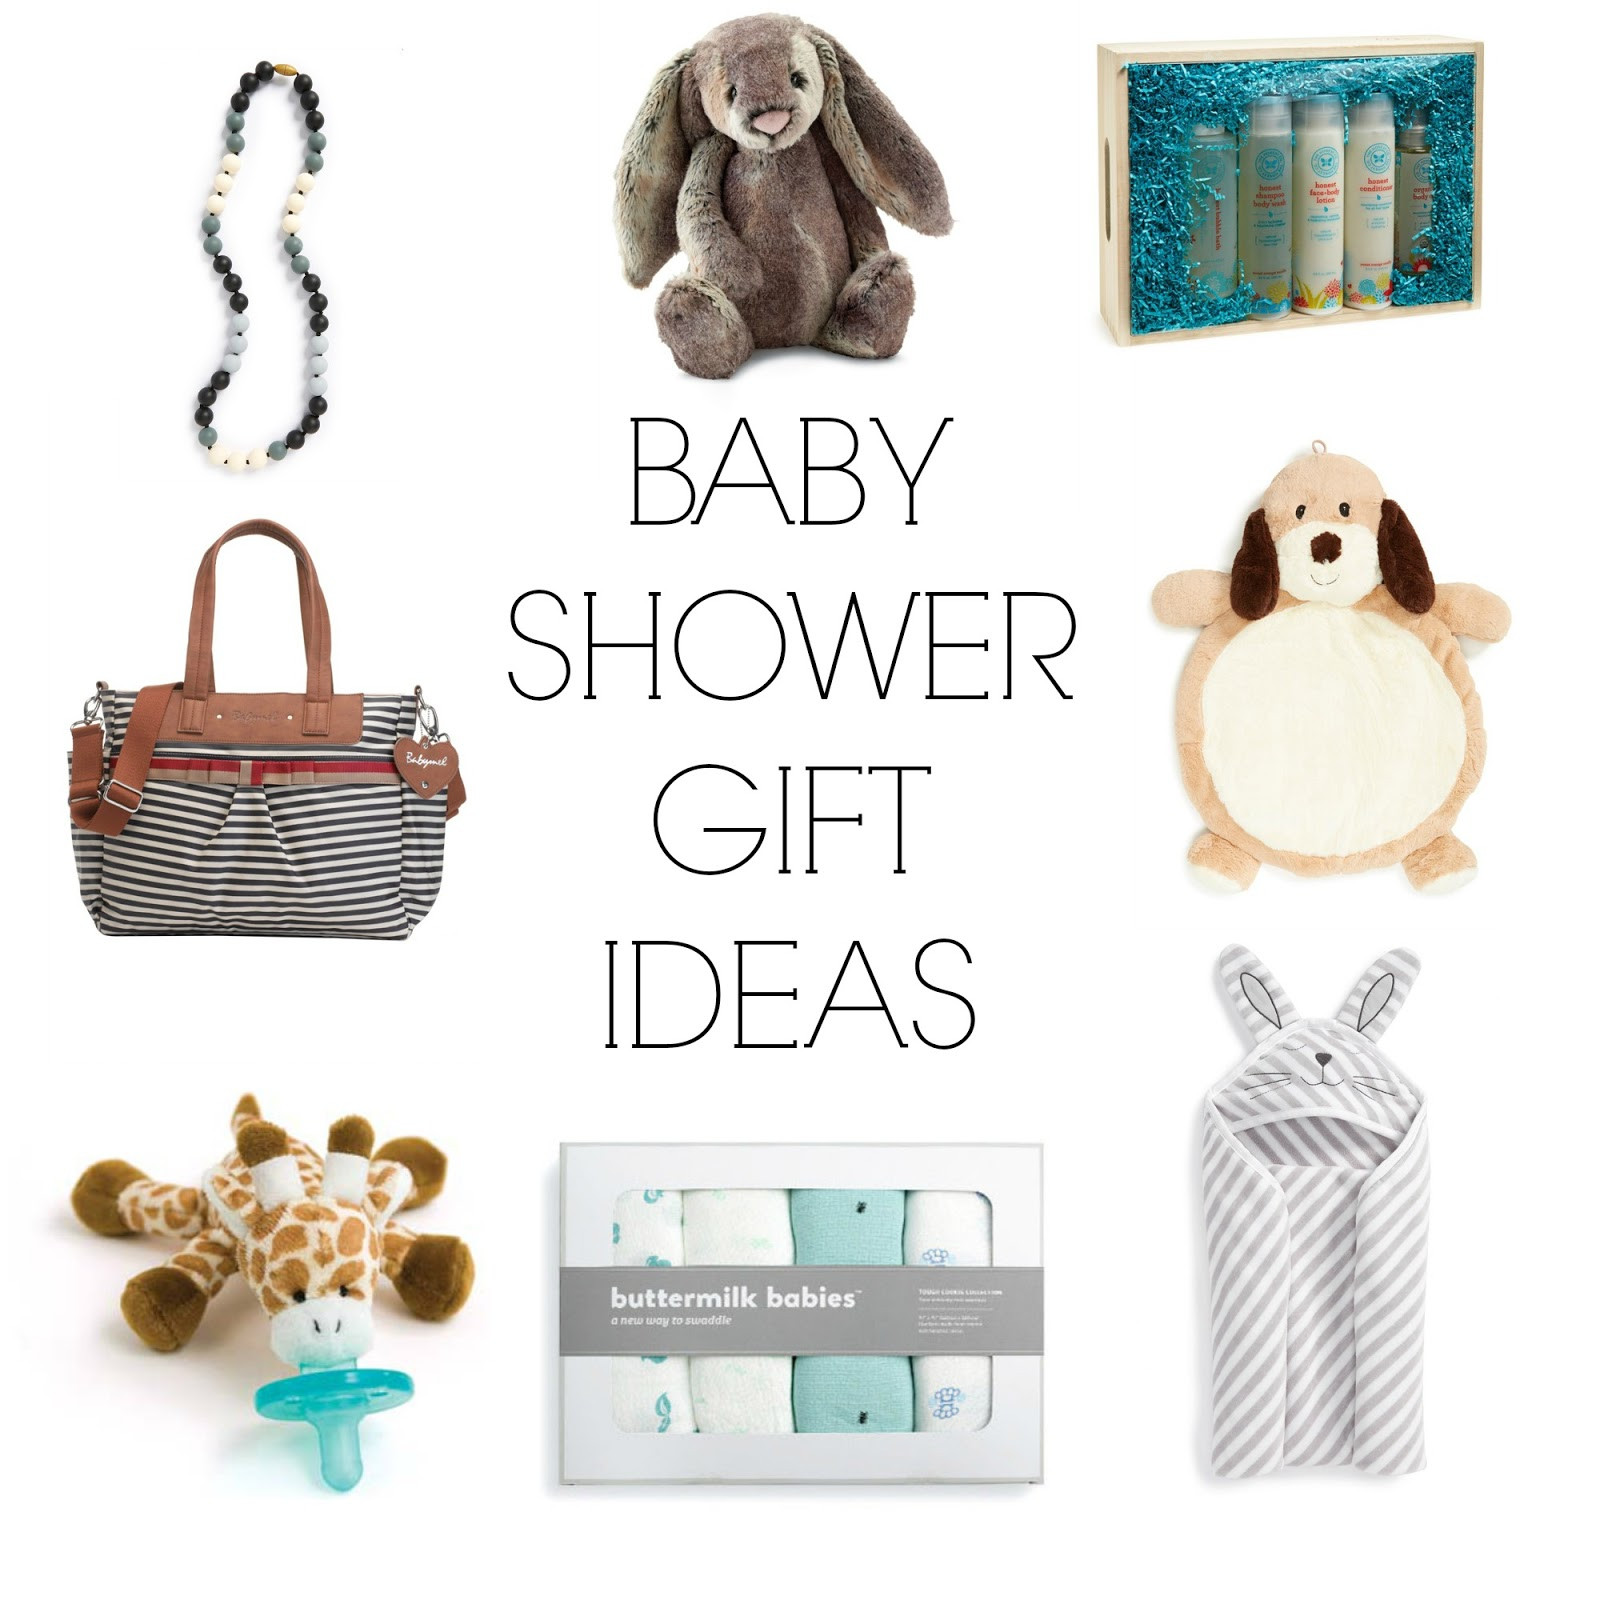 Baby Shower Take Away Gift Ideas
 Baby Shower Gift Ideas Buttermilk Babies Giveaway